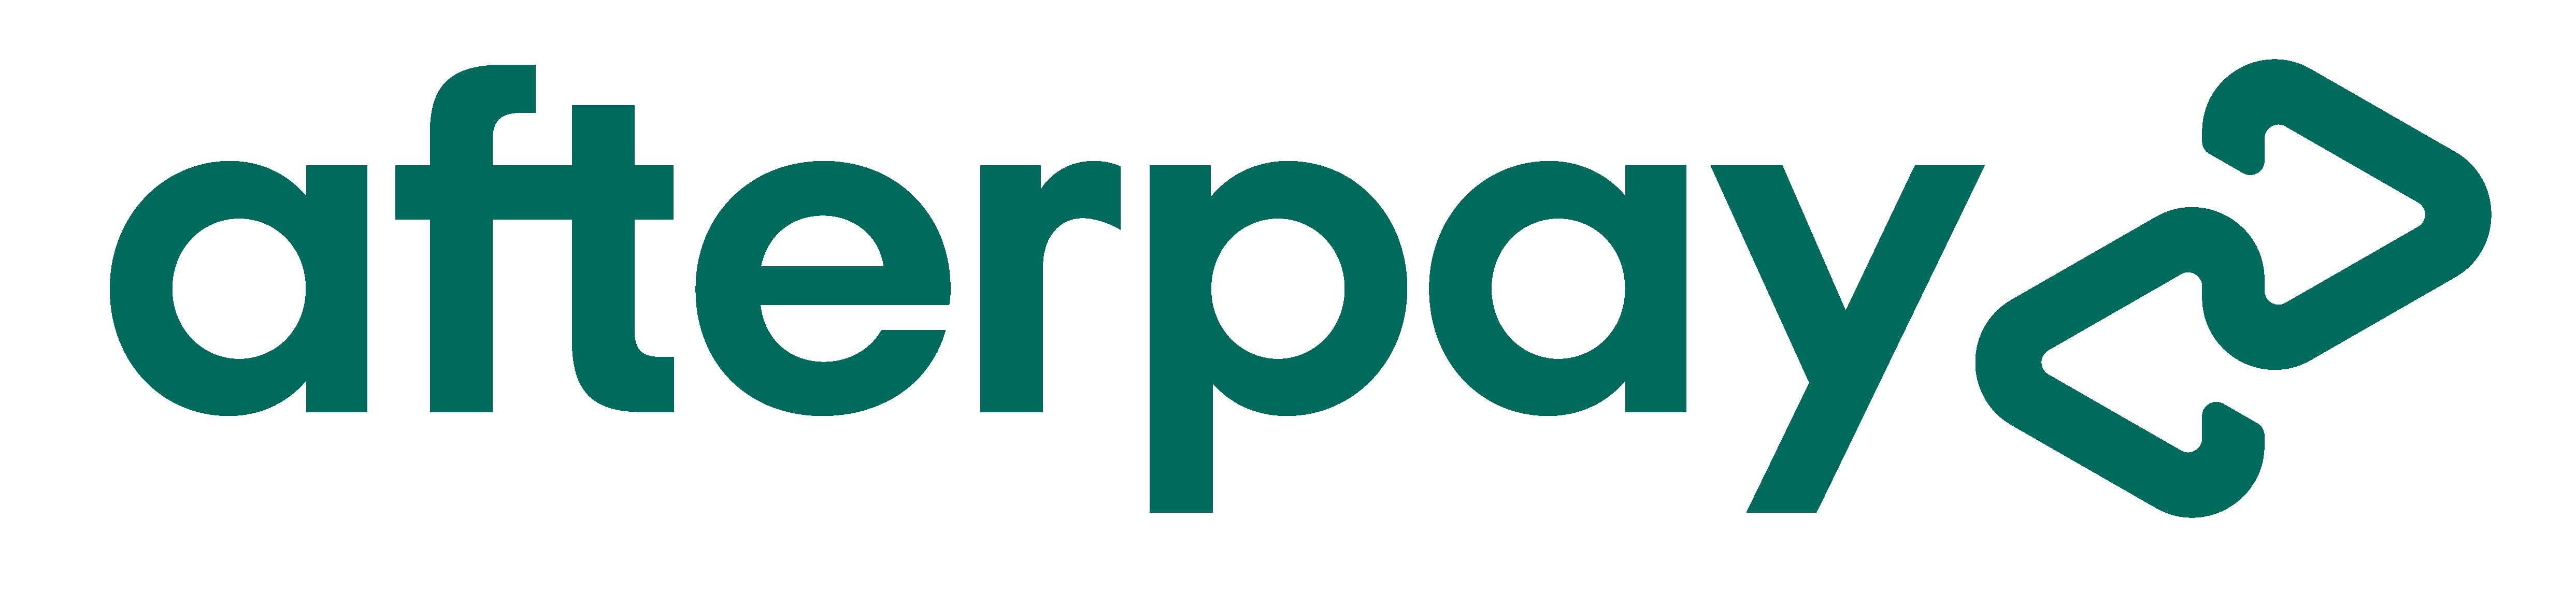 Afterpay logo for Peep Optical.